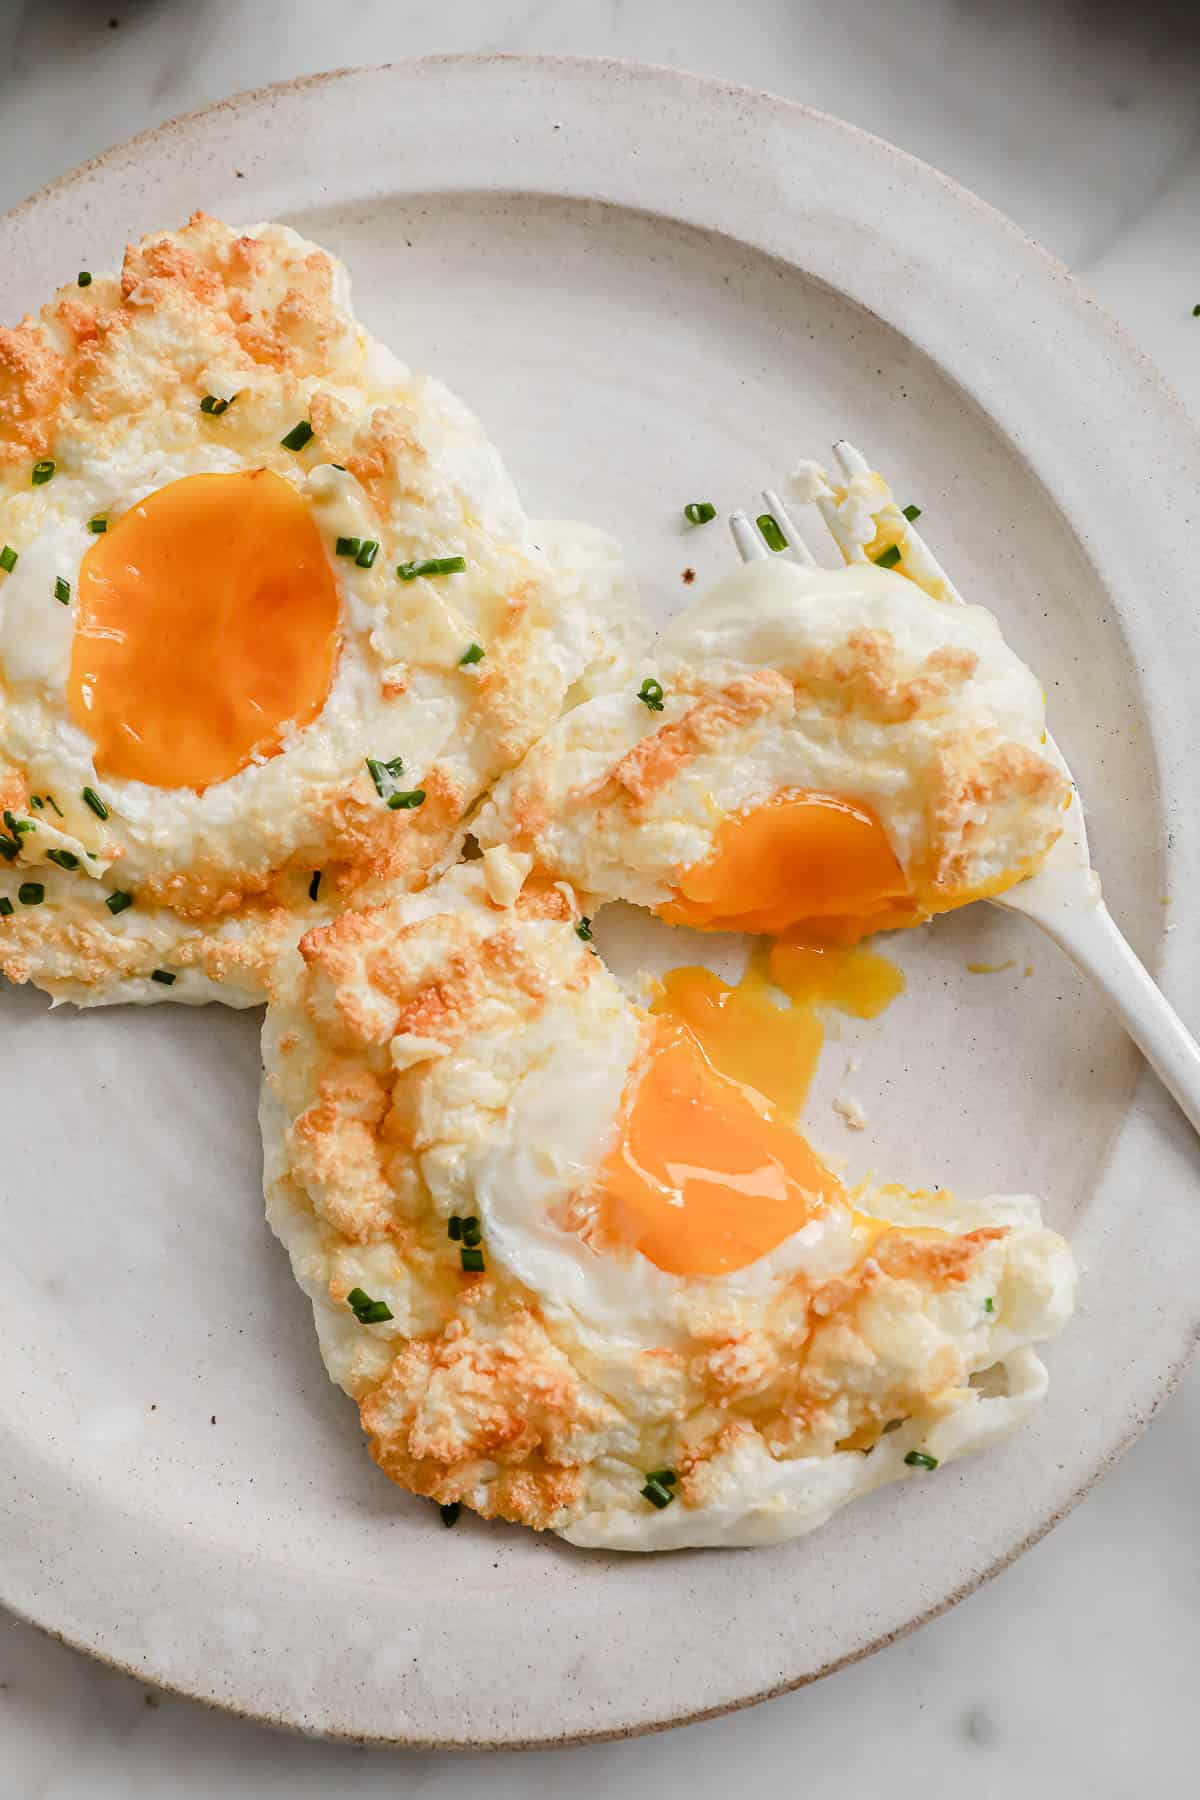 2 baked egg clouds, topped with chives, on a white ceramic plate with a fork